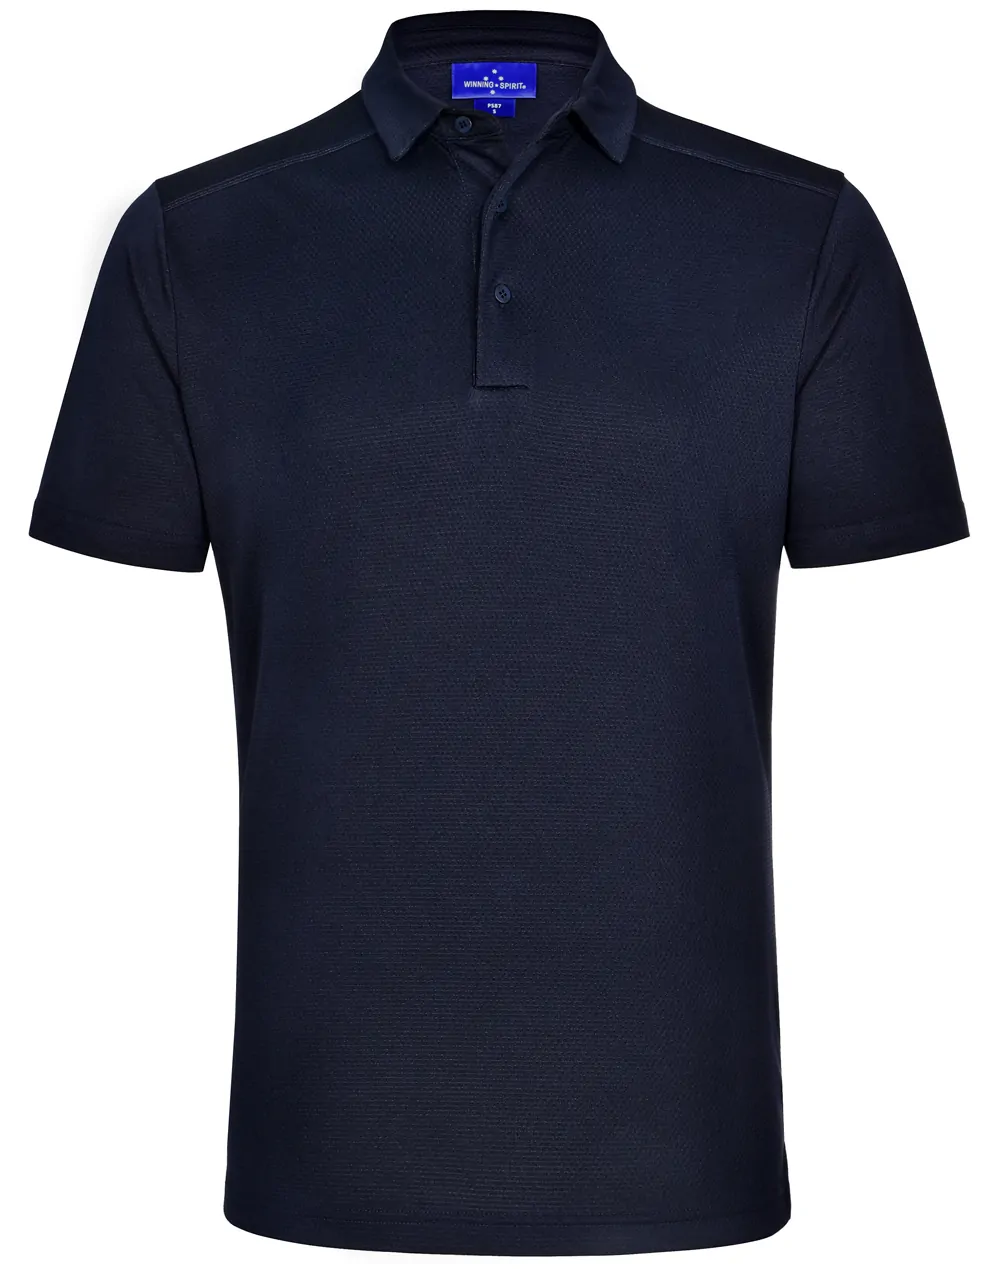 Bamboo Charcoal Corporate Short Sleeve Polo Men’s